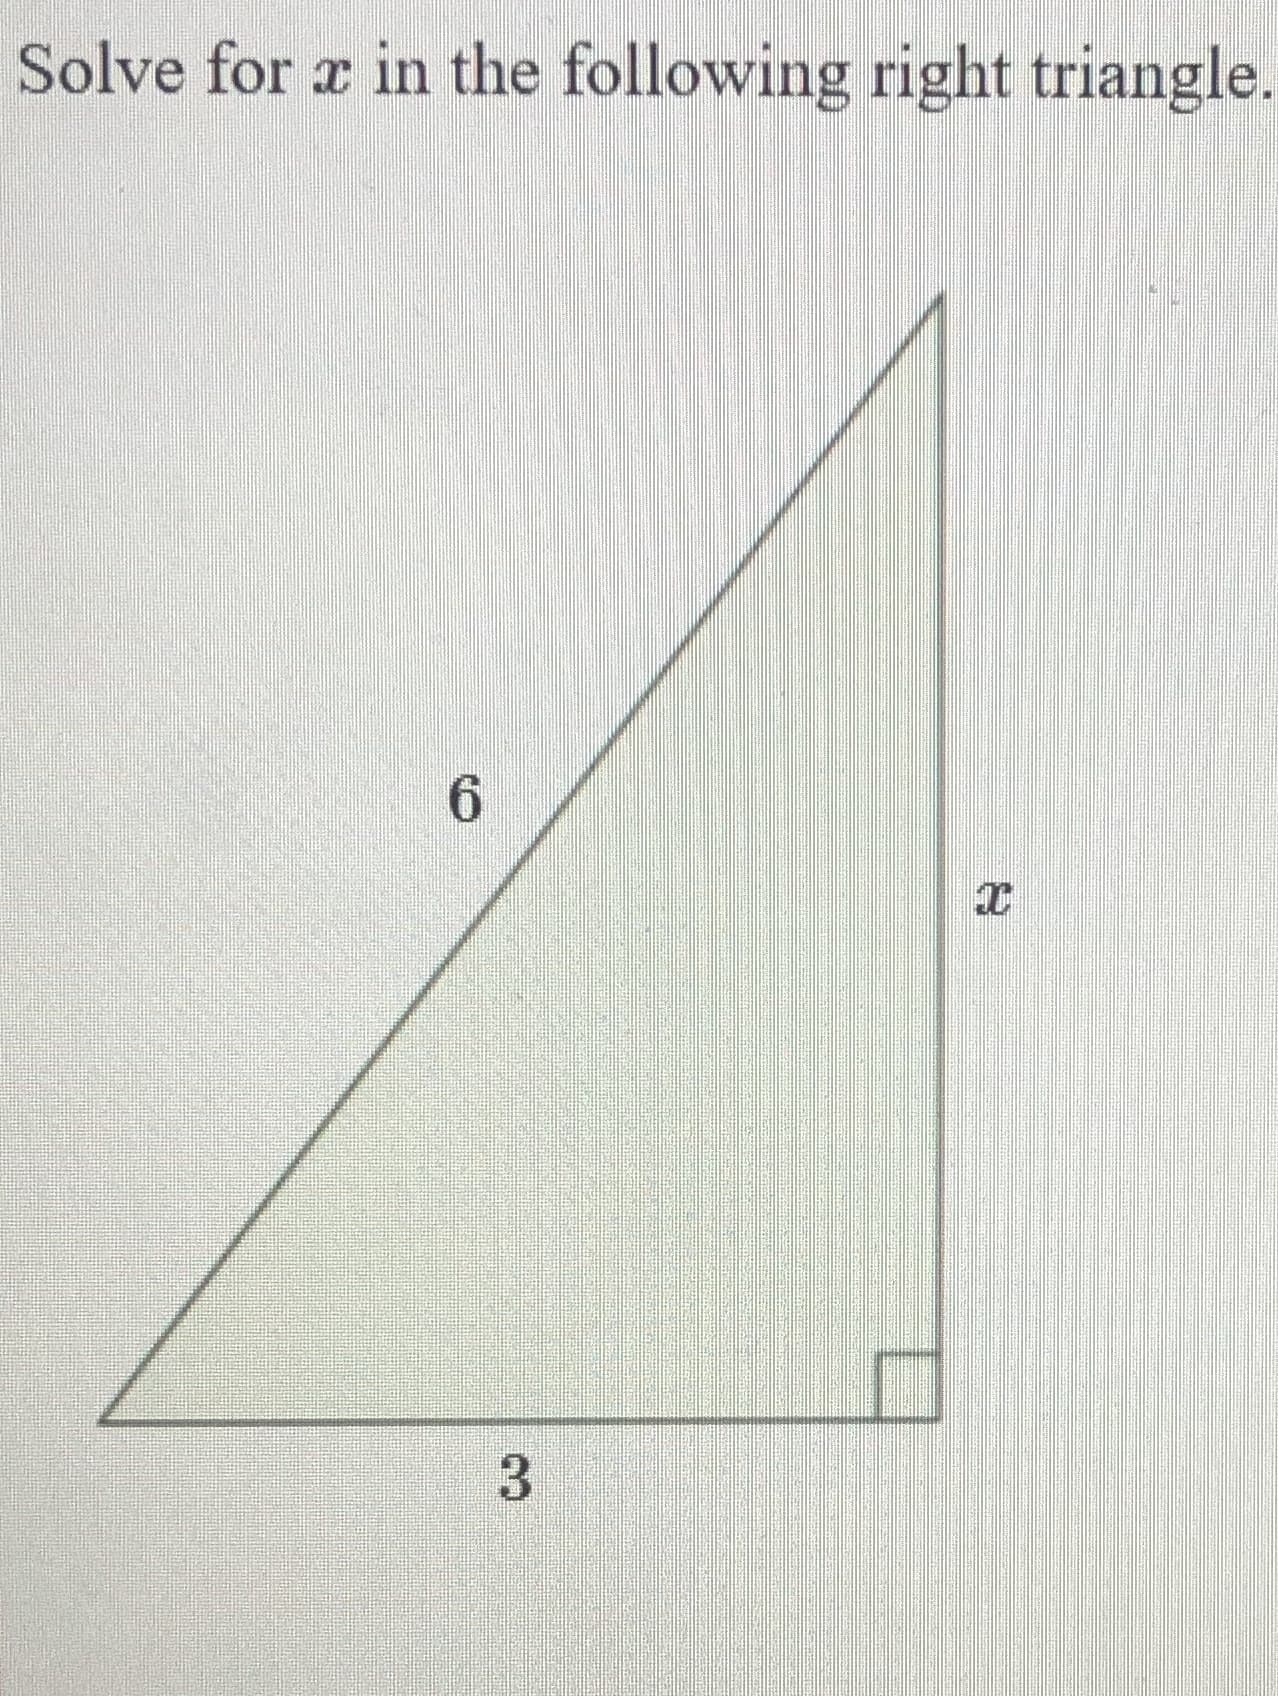 Solve for x in the following right triangle.
